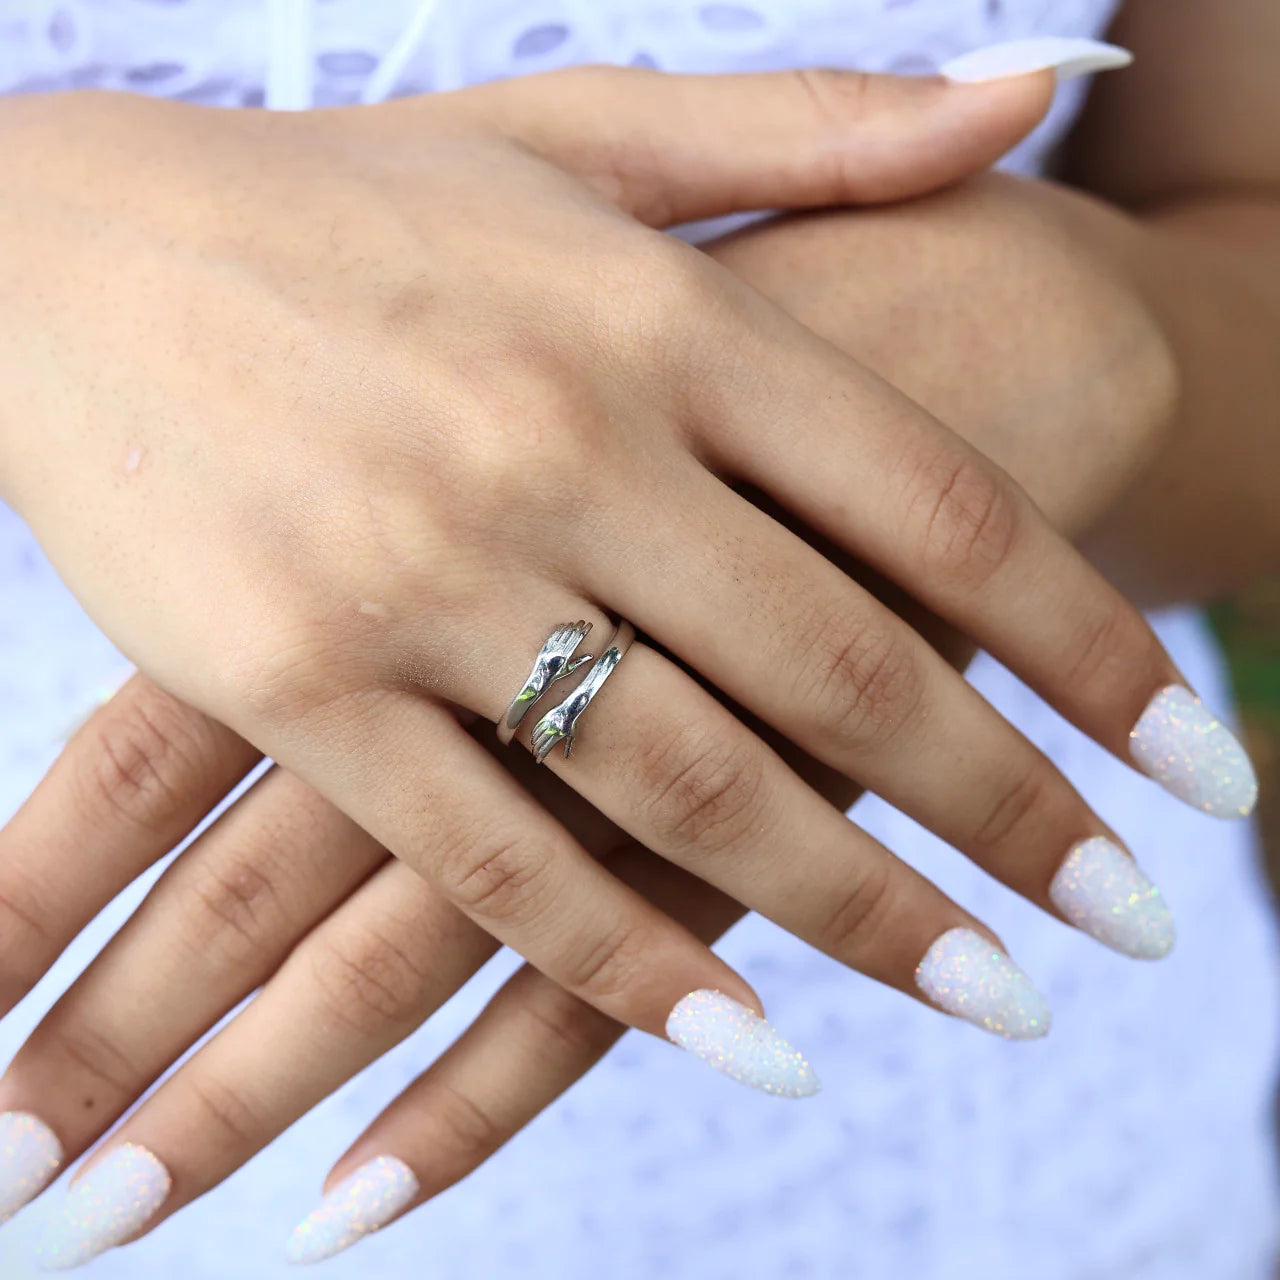 Can A Single Woman Wear A Ring On Her Left Hand?